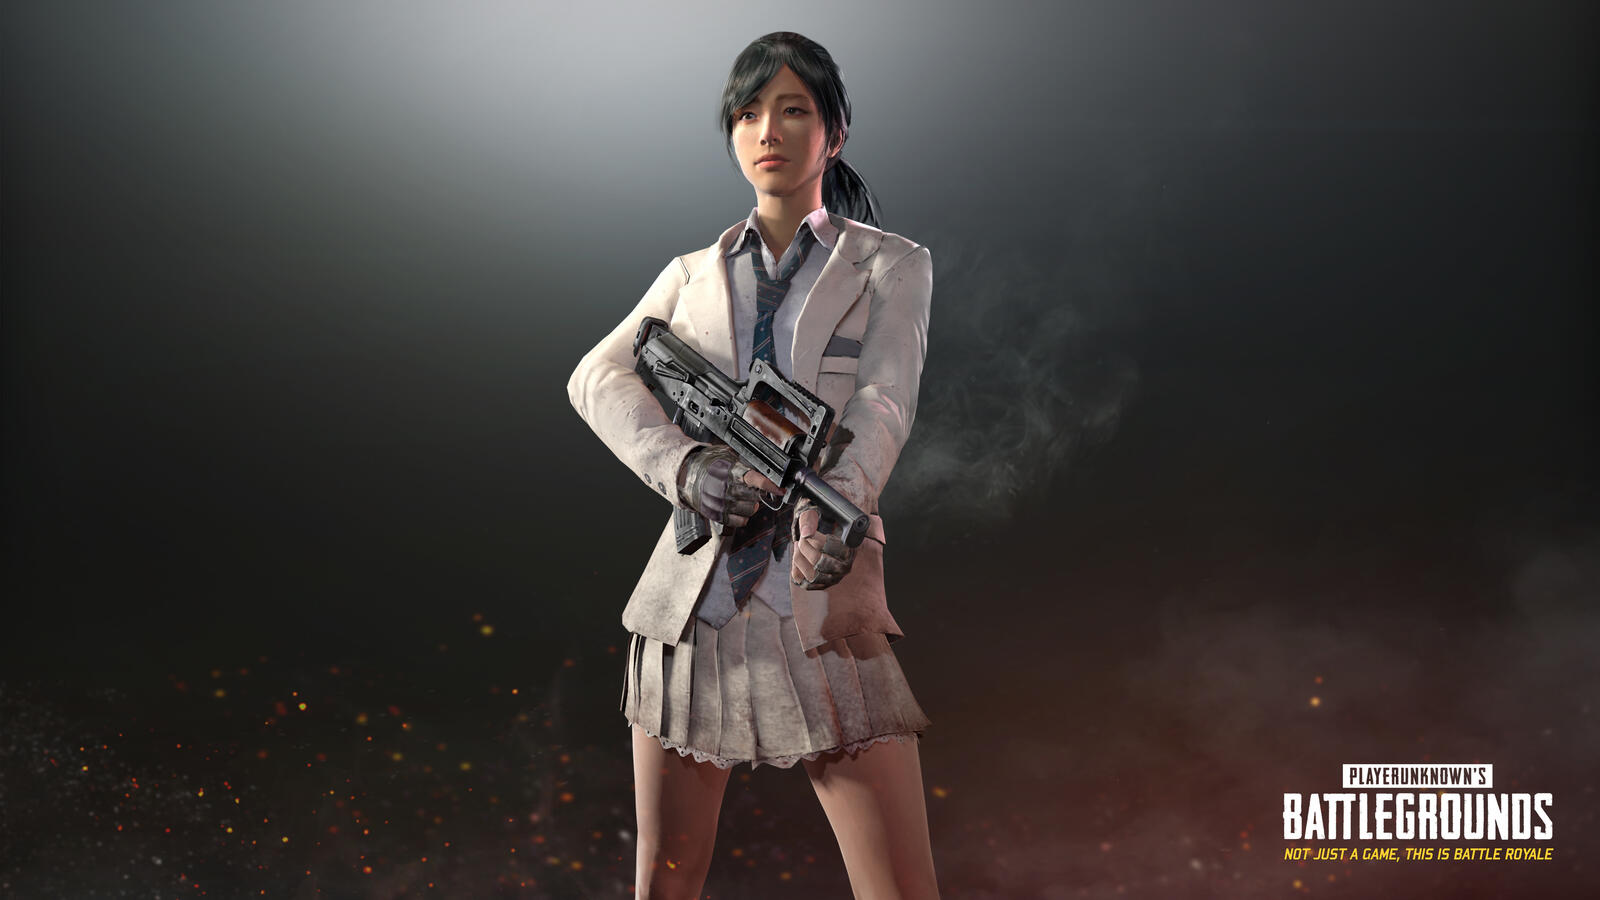 Free photo Girl in white suit with automatic rifle from Playerunknowns Battlegrounds game